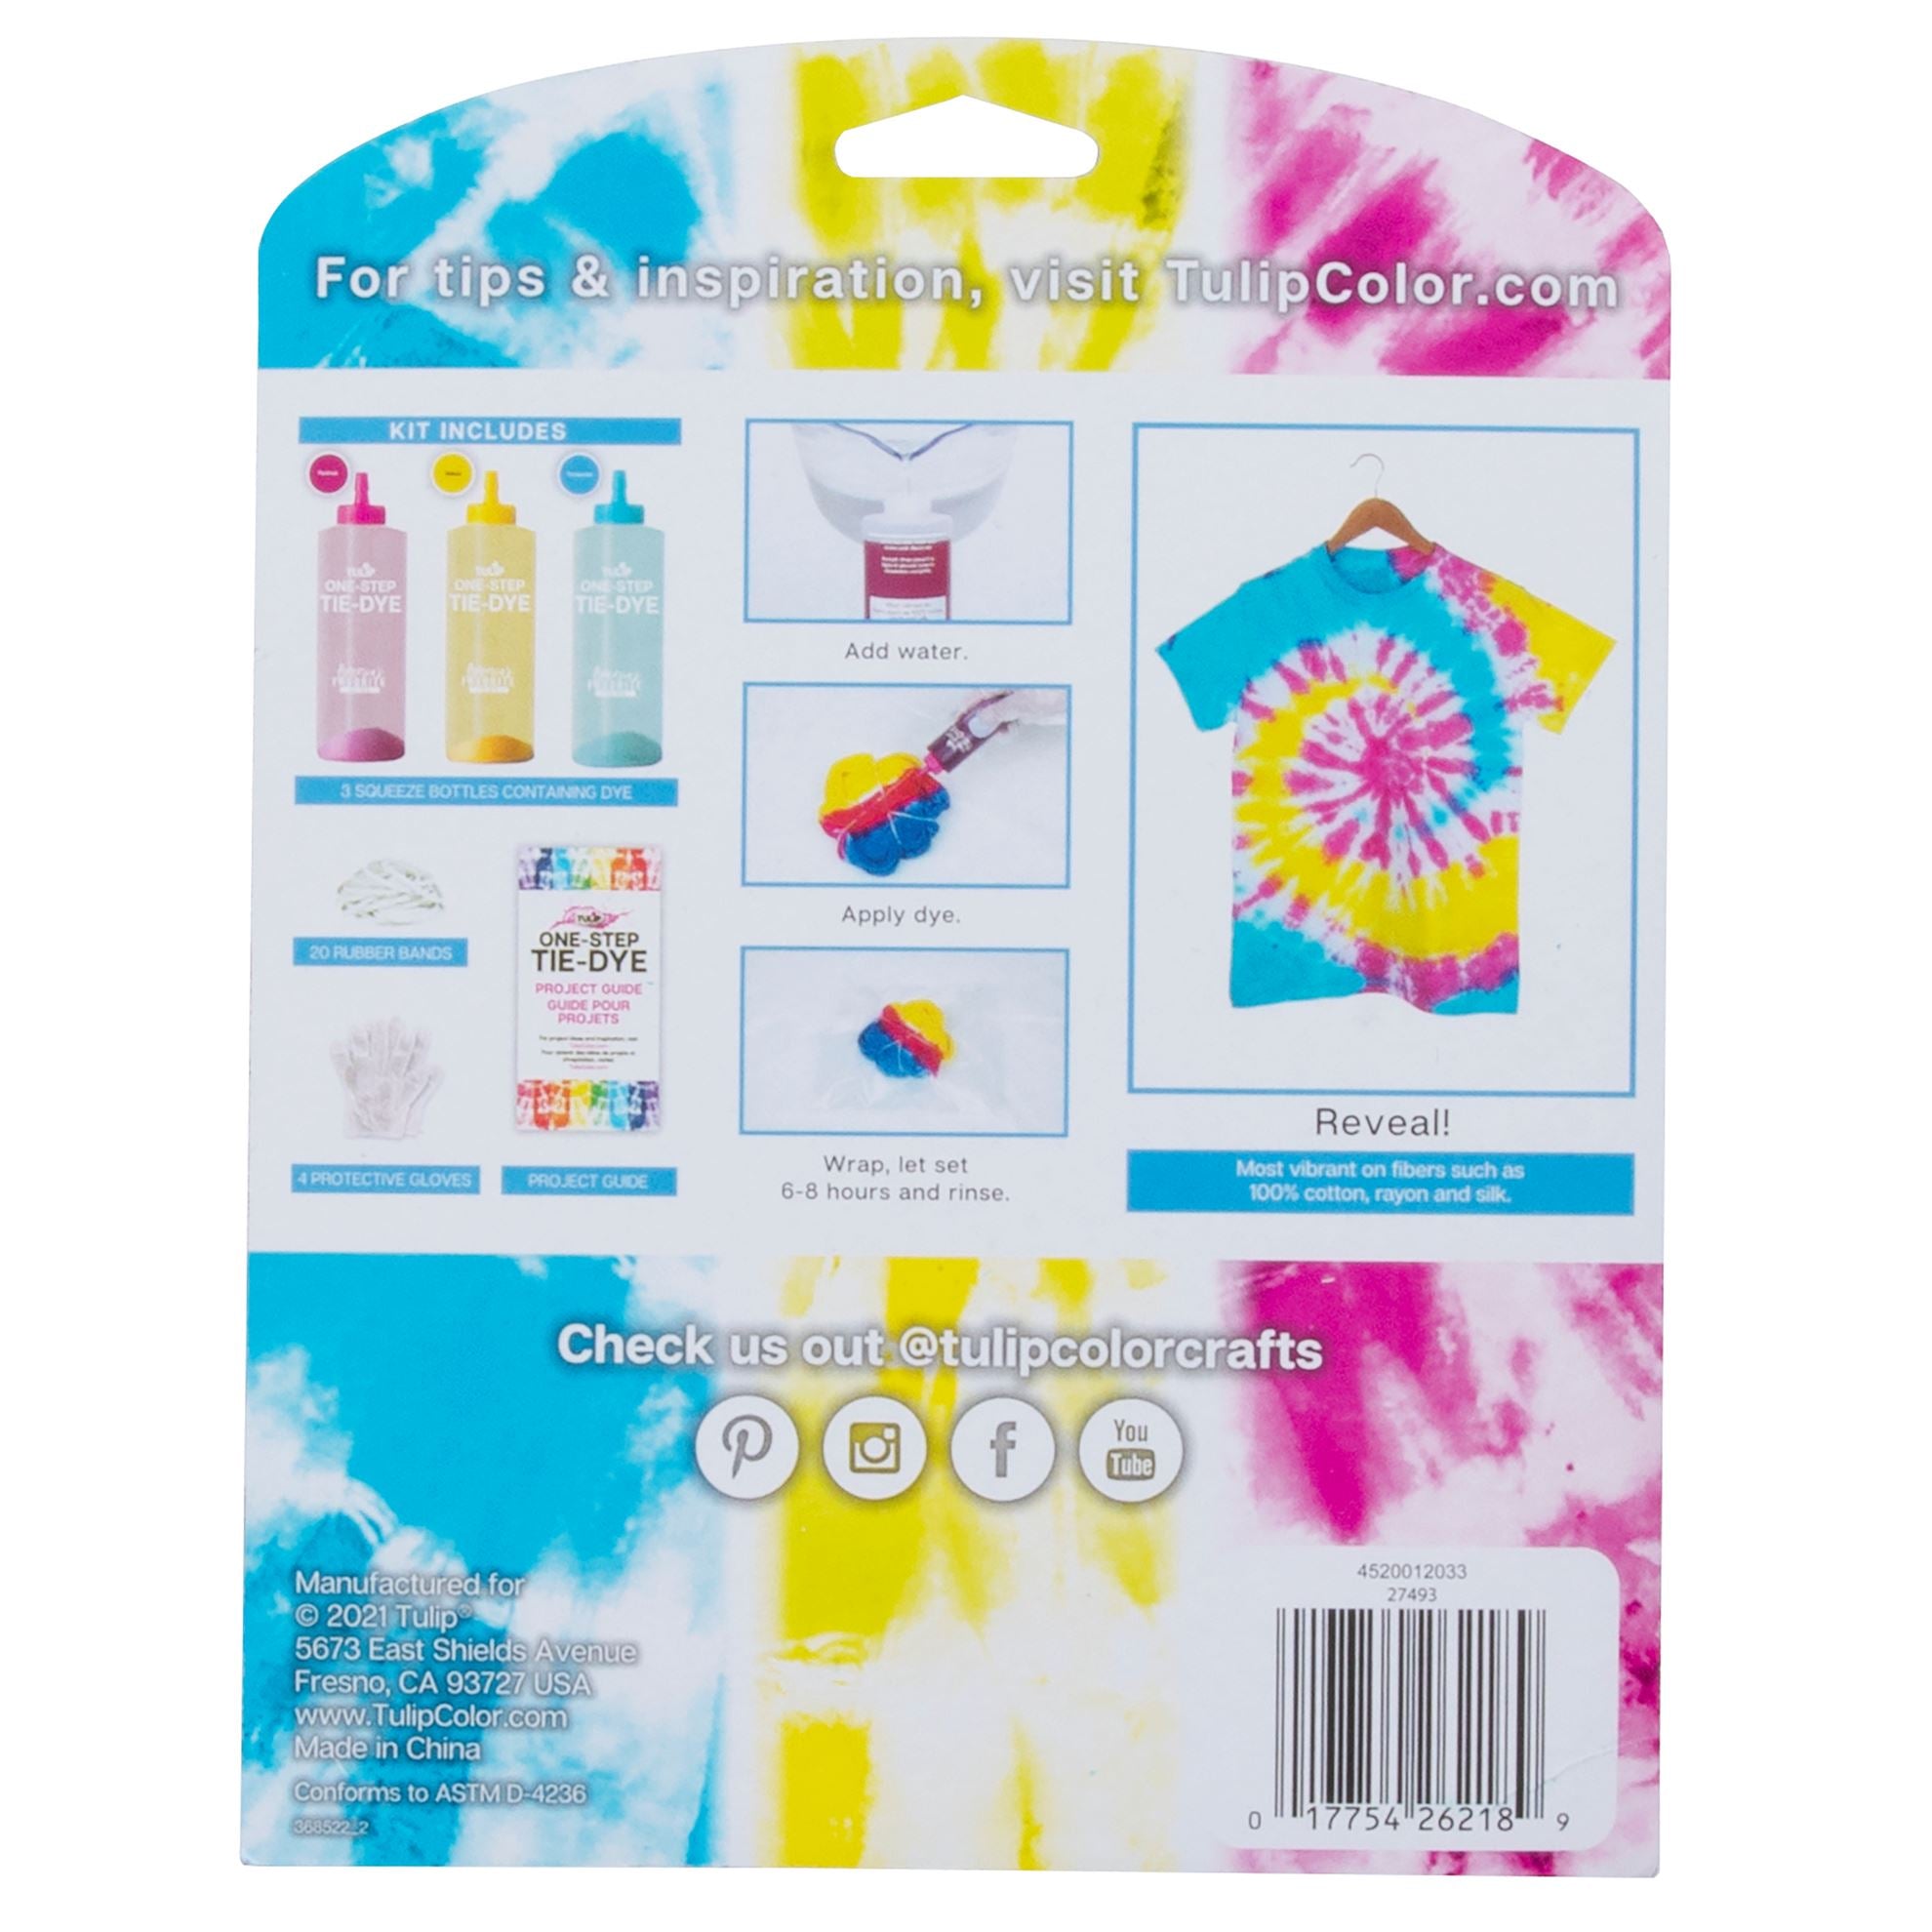 Discovery *NEW* Tie Dye Kit for Kids + Adults - 10 Colors Rubber